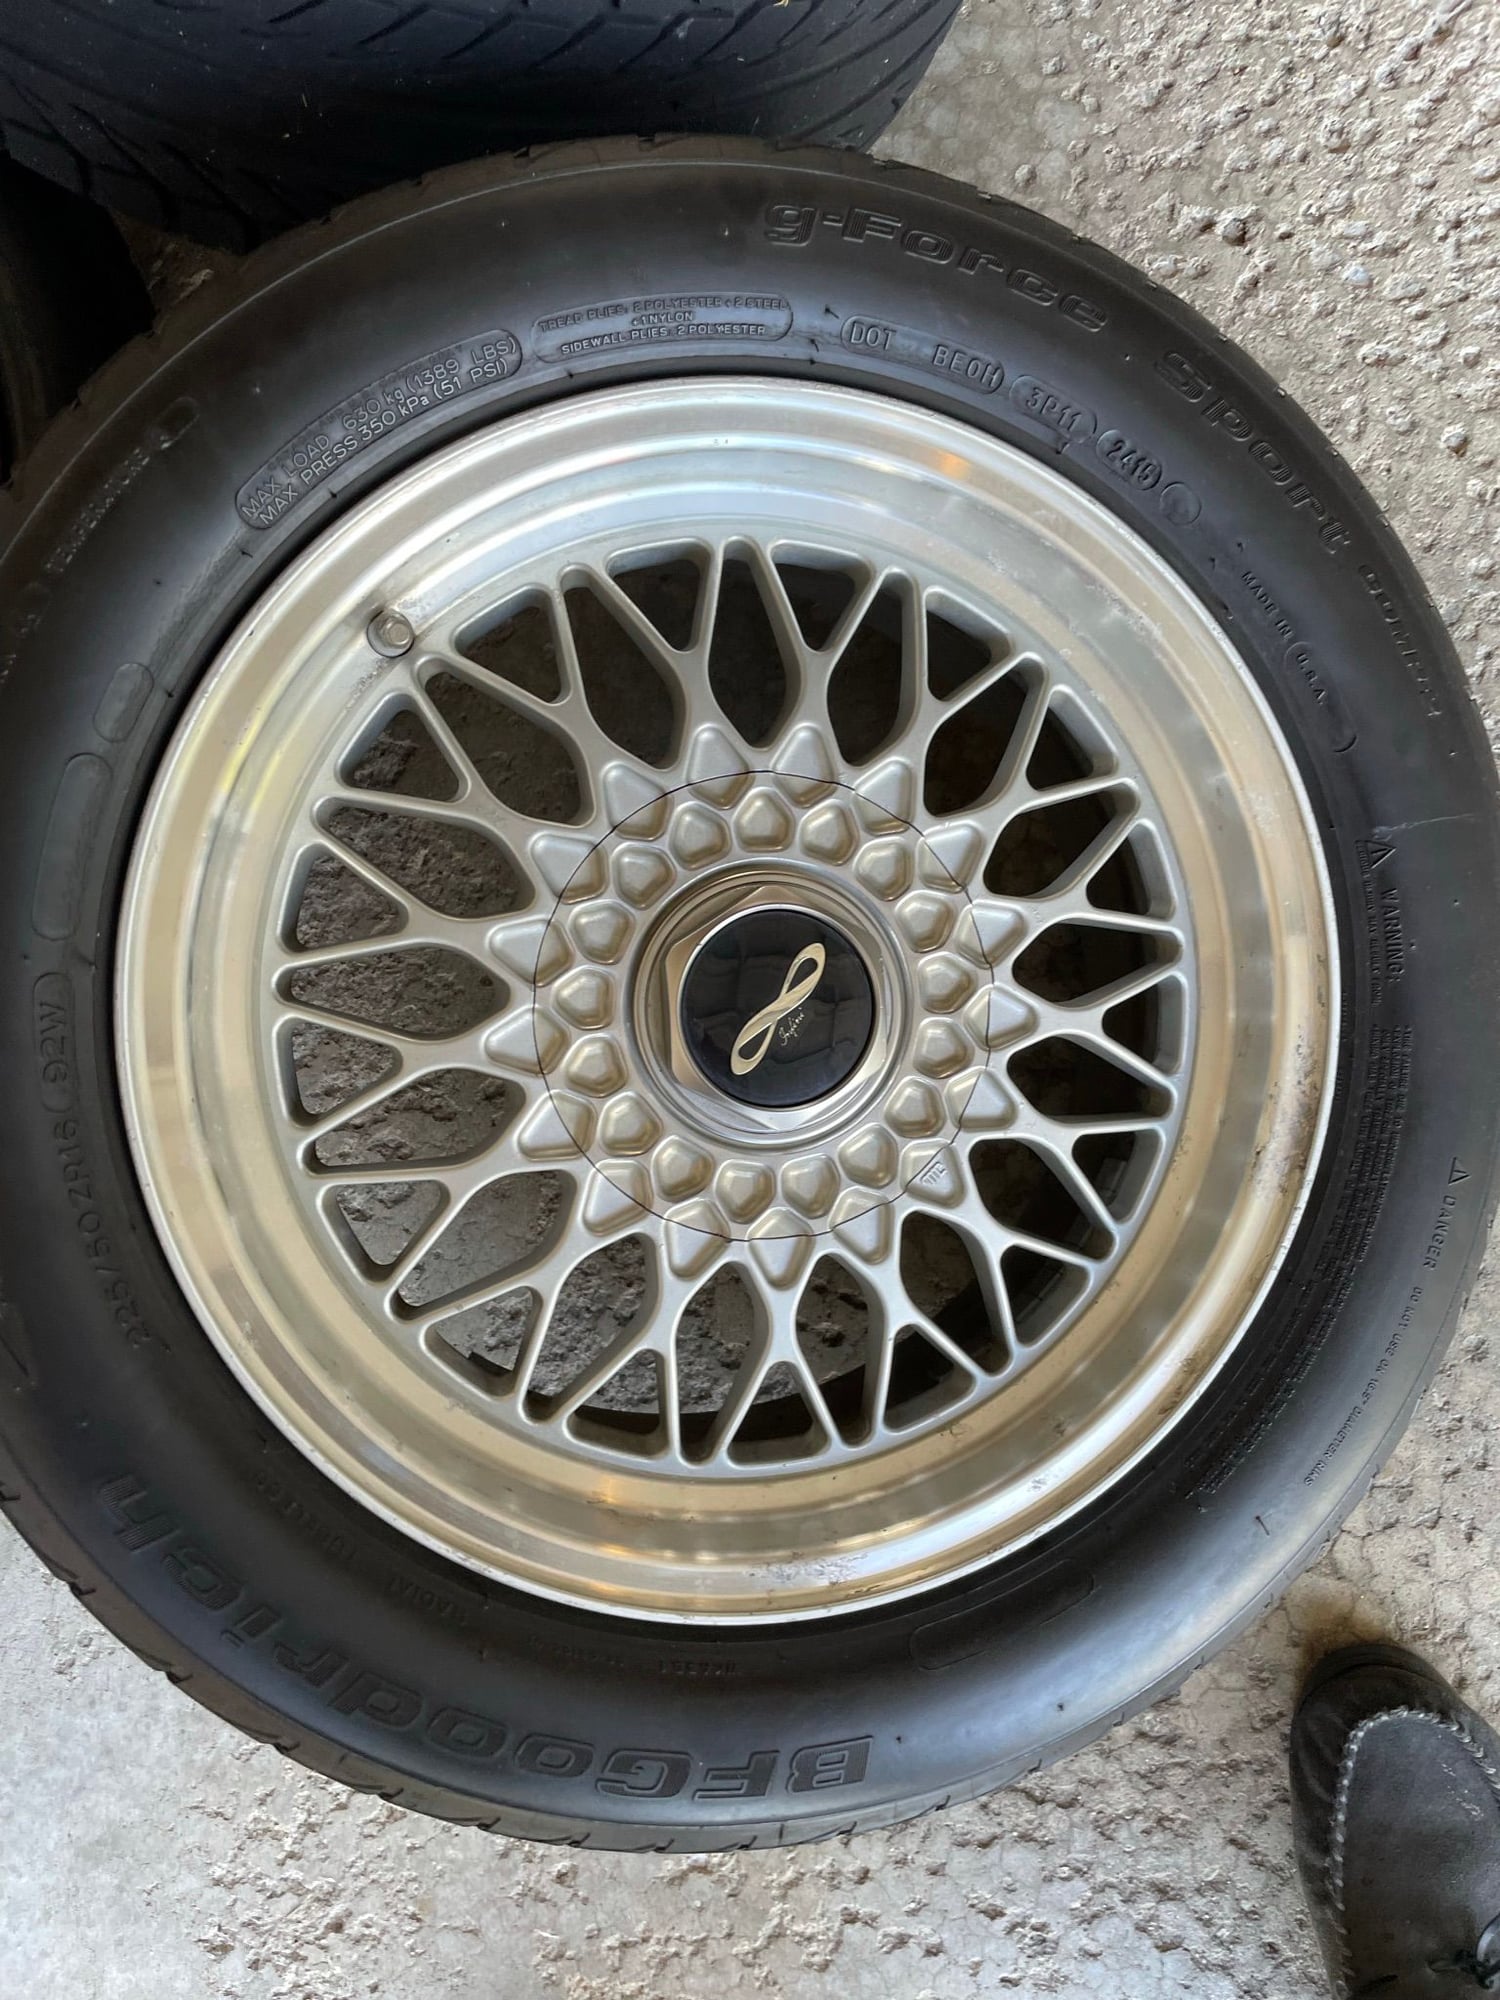 Wheels and Tires/Axles - Infini wheels. - Used - 1986 to 1991 Mazda RX-7 - Saint Louis, MO 63114, United States